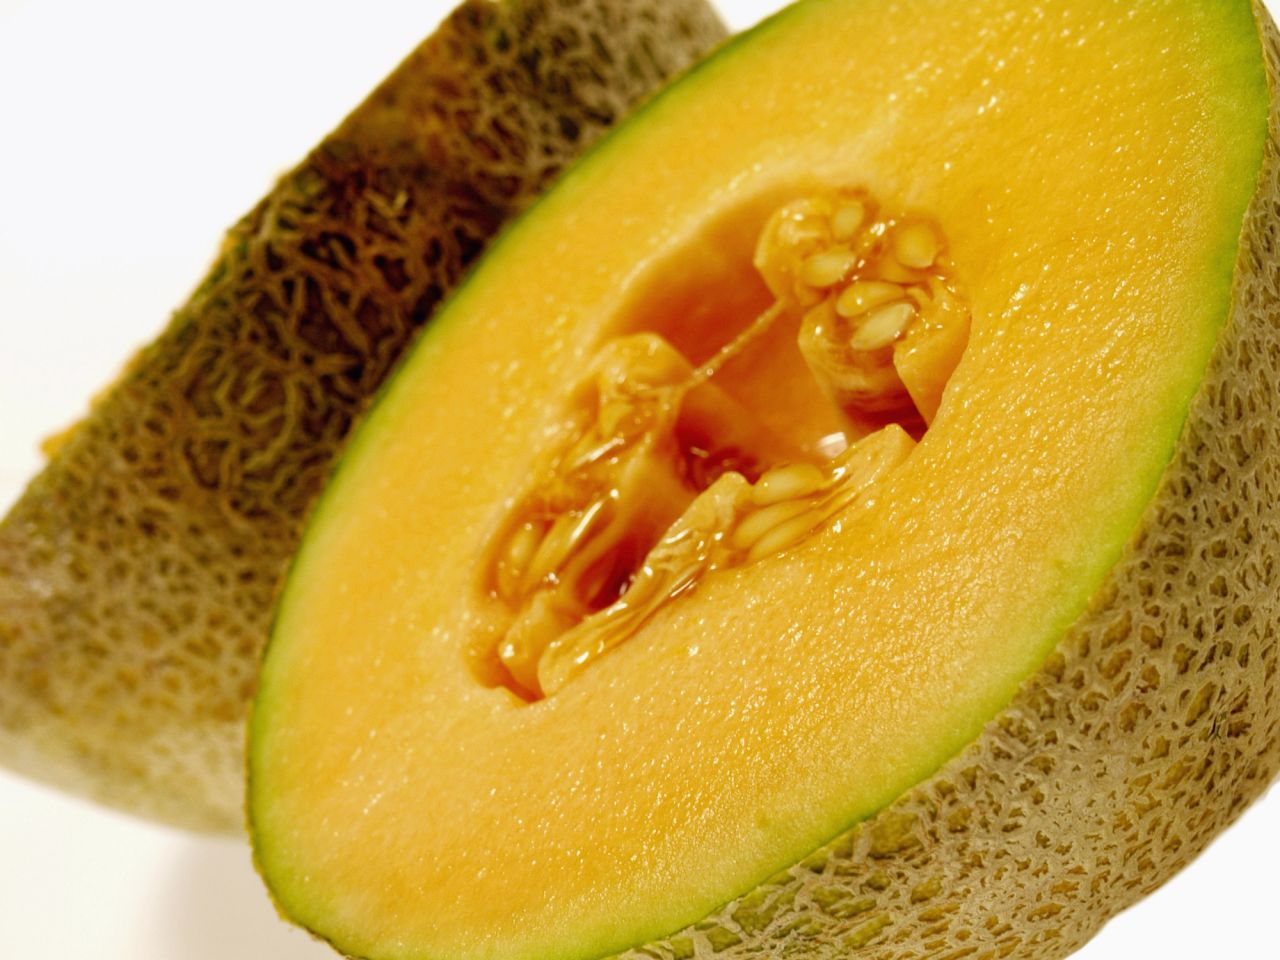 In 2001, cantaloupe was <a href="http://www.cdc.gov/mmwr/preview/mmwrhtml/mm5146a2.htm" target="_blank" target="_blank">again the culprit</a>. Salmonella tainted the fruit that killed two, hospitalized nine and infected 50 in an outbreak that started in Mexico. 